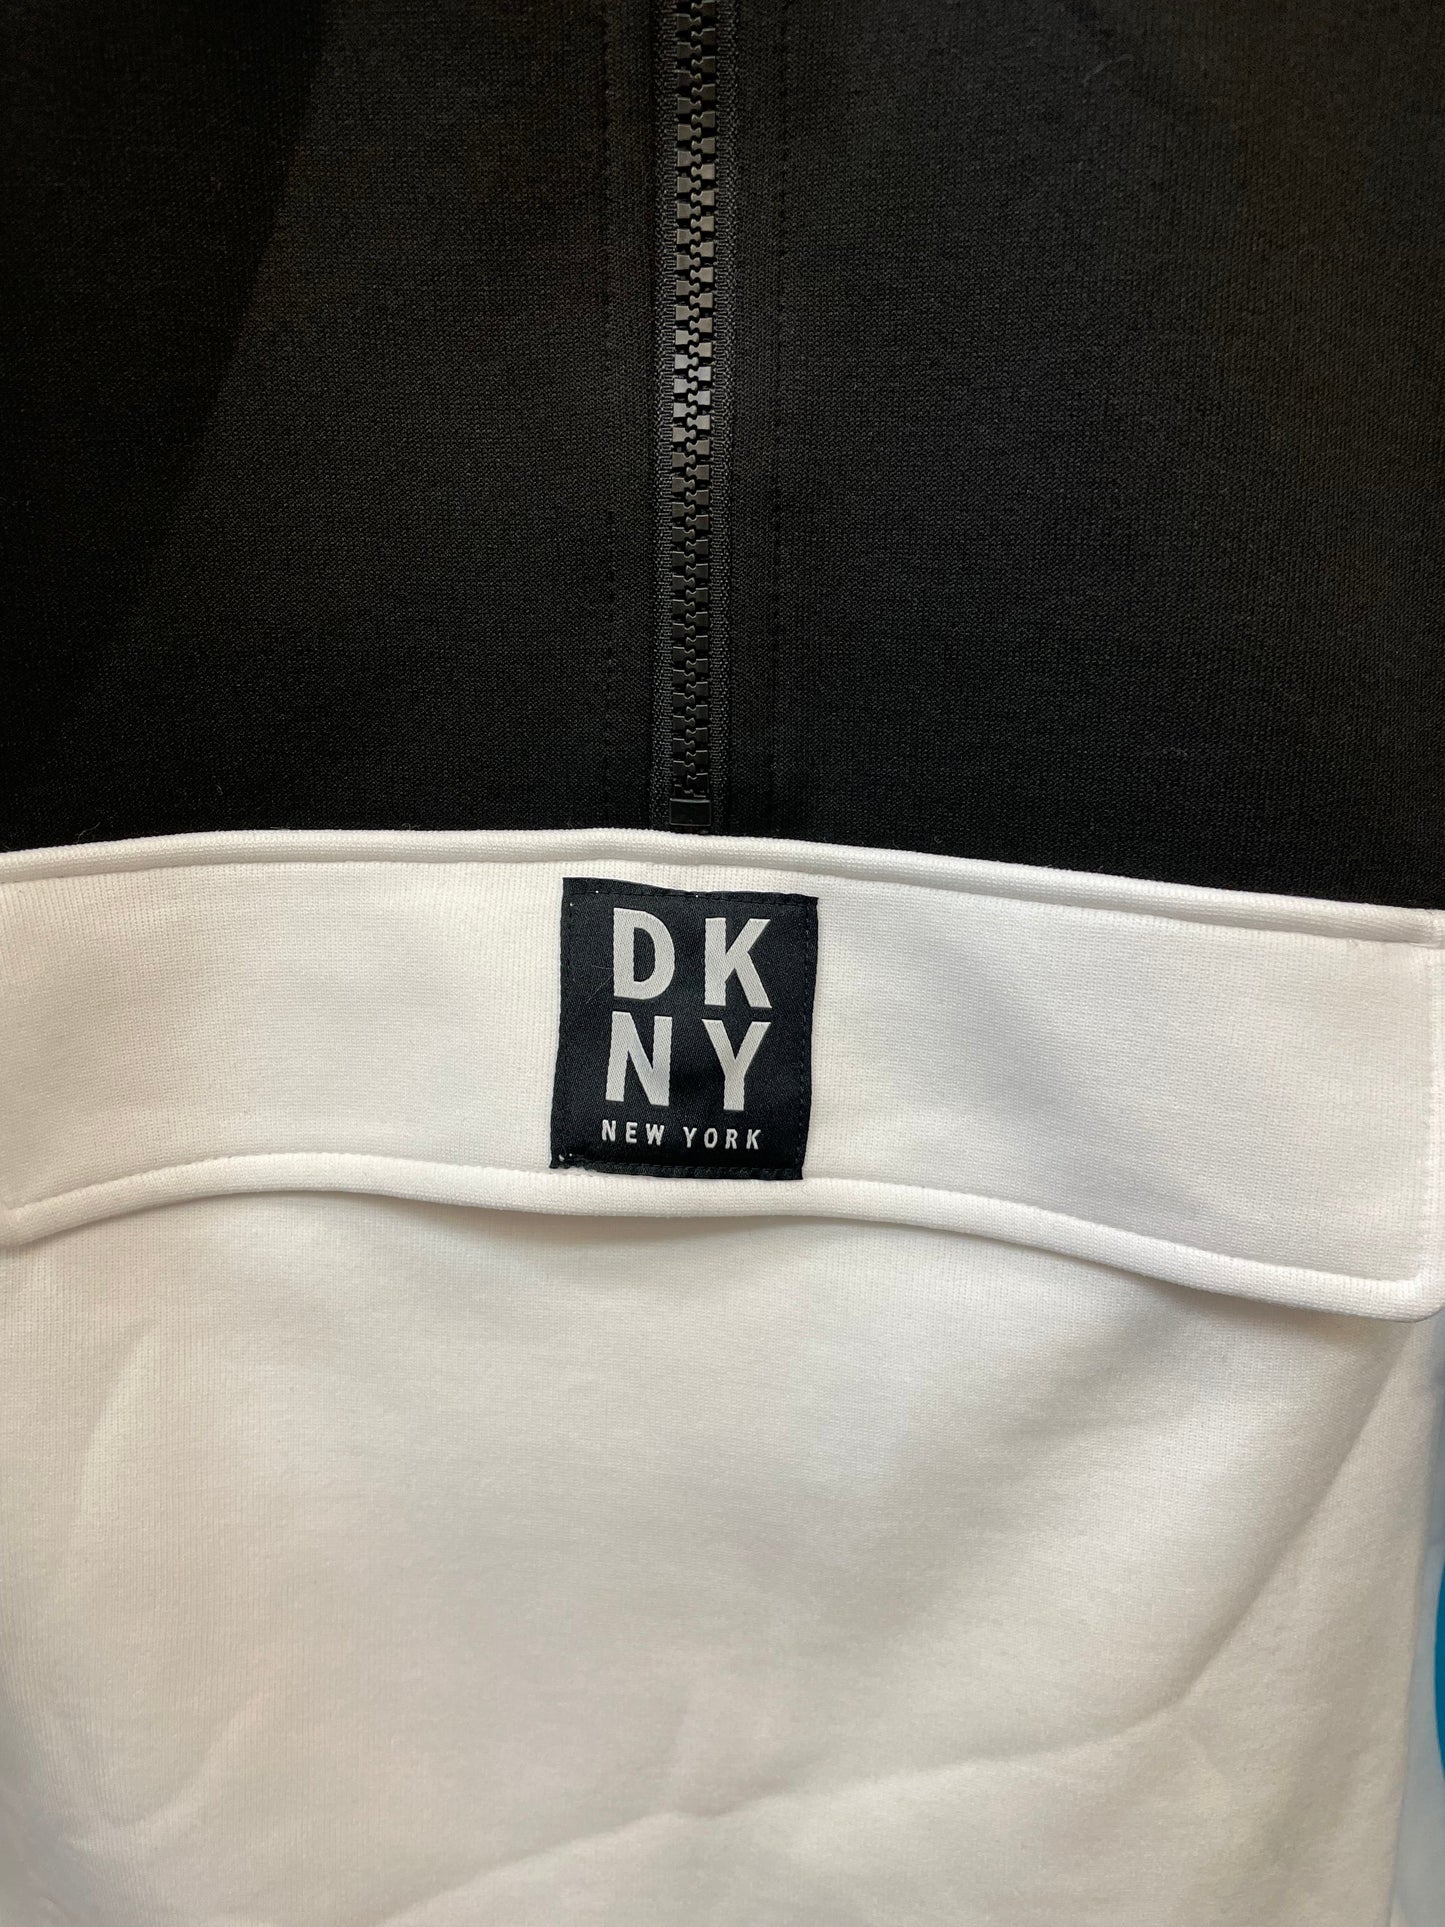 Jacket Other By Dkny  Size: S